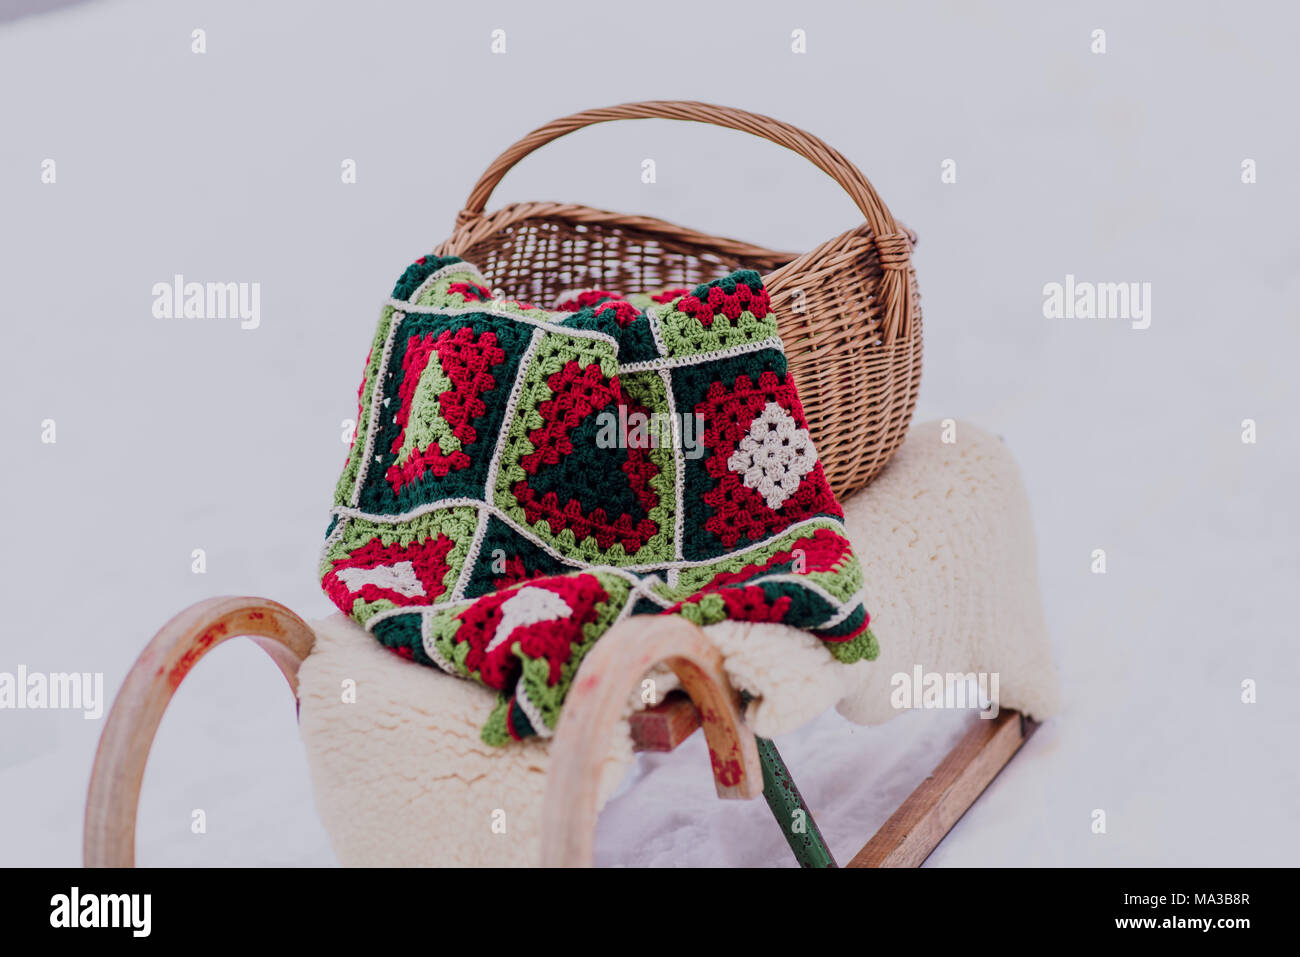 Sledge with wicker basket,blanket and fur in the snow, Stock Photo